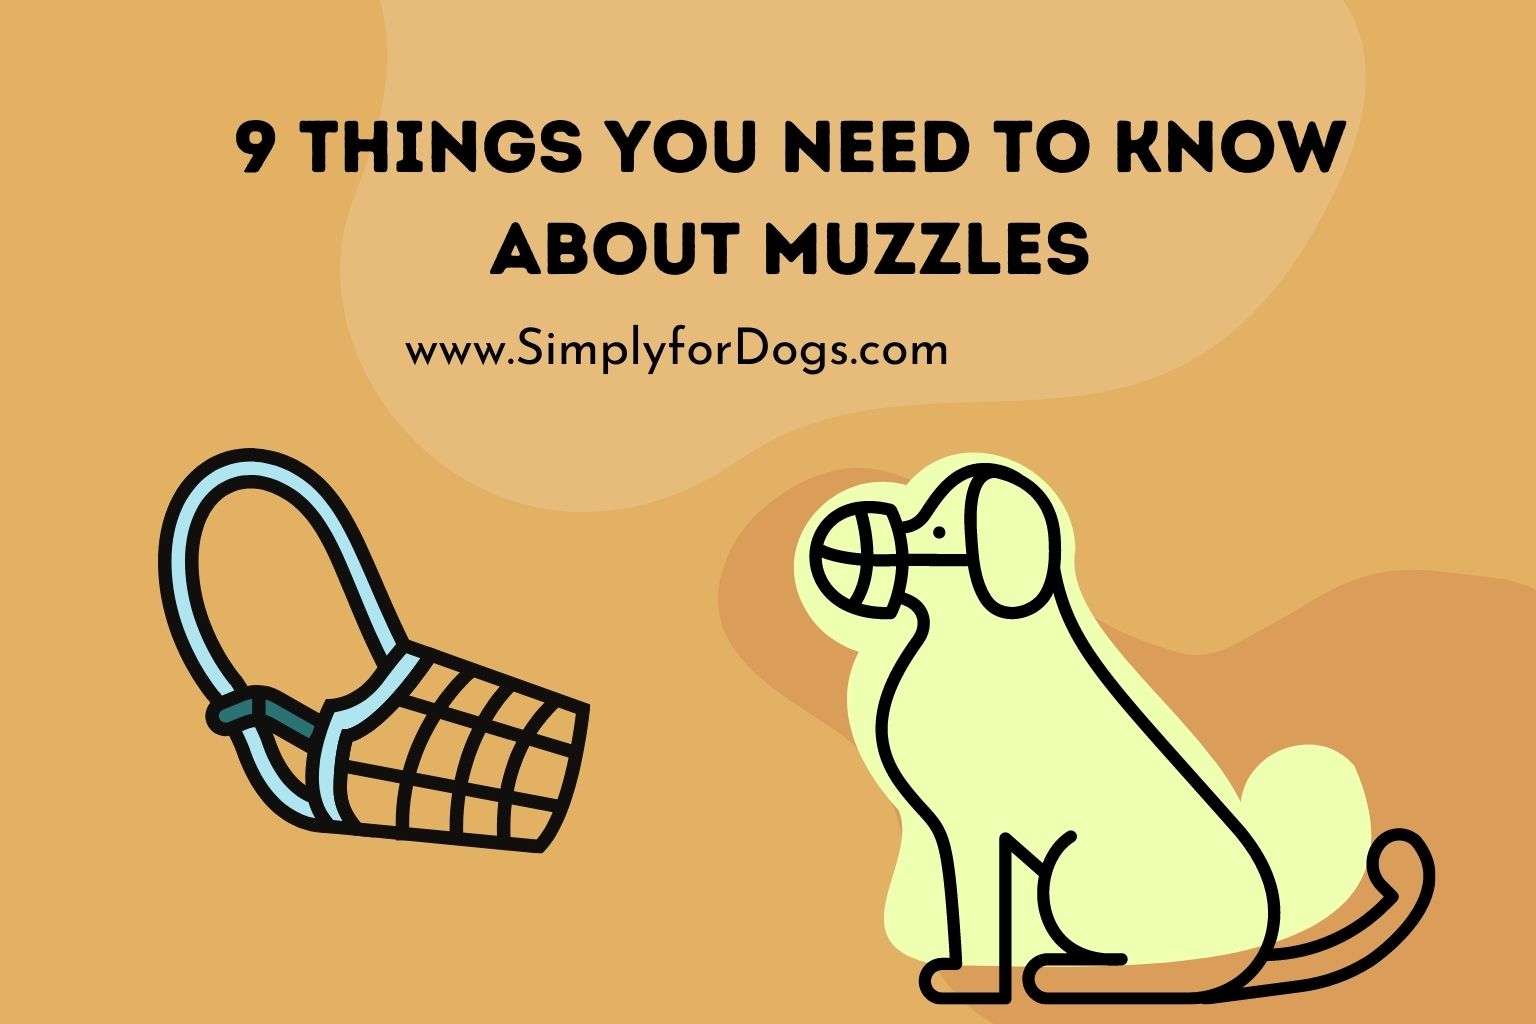 9 Things You Need to Know About Muzzles